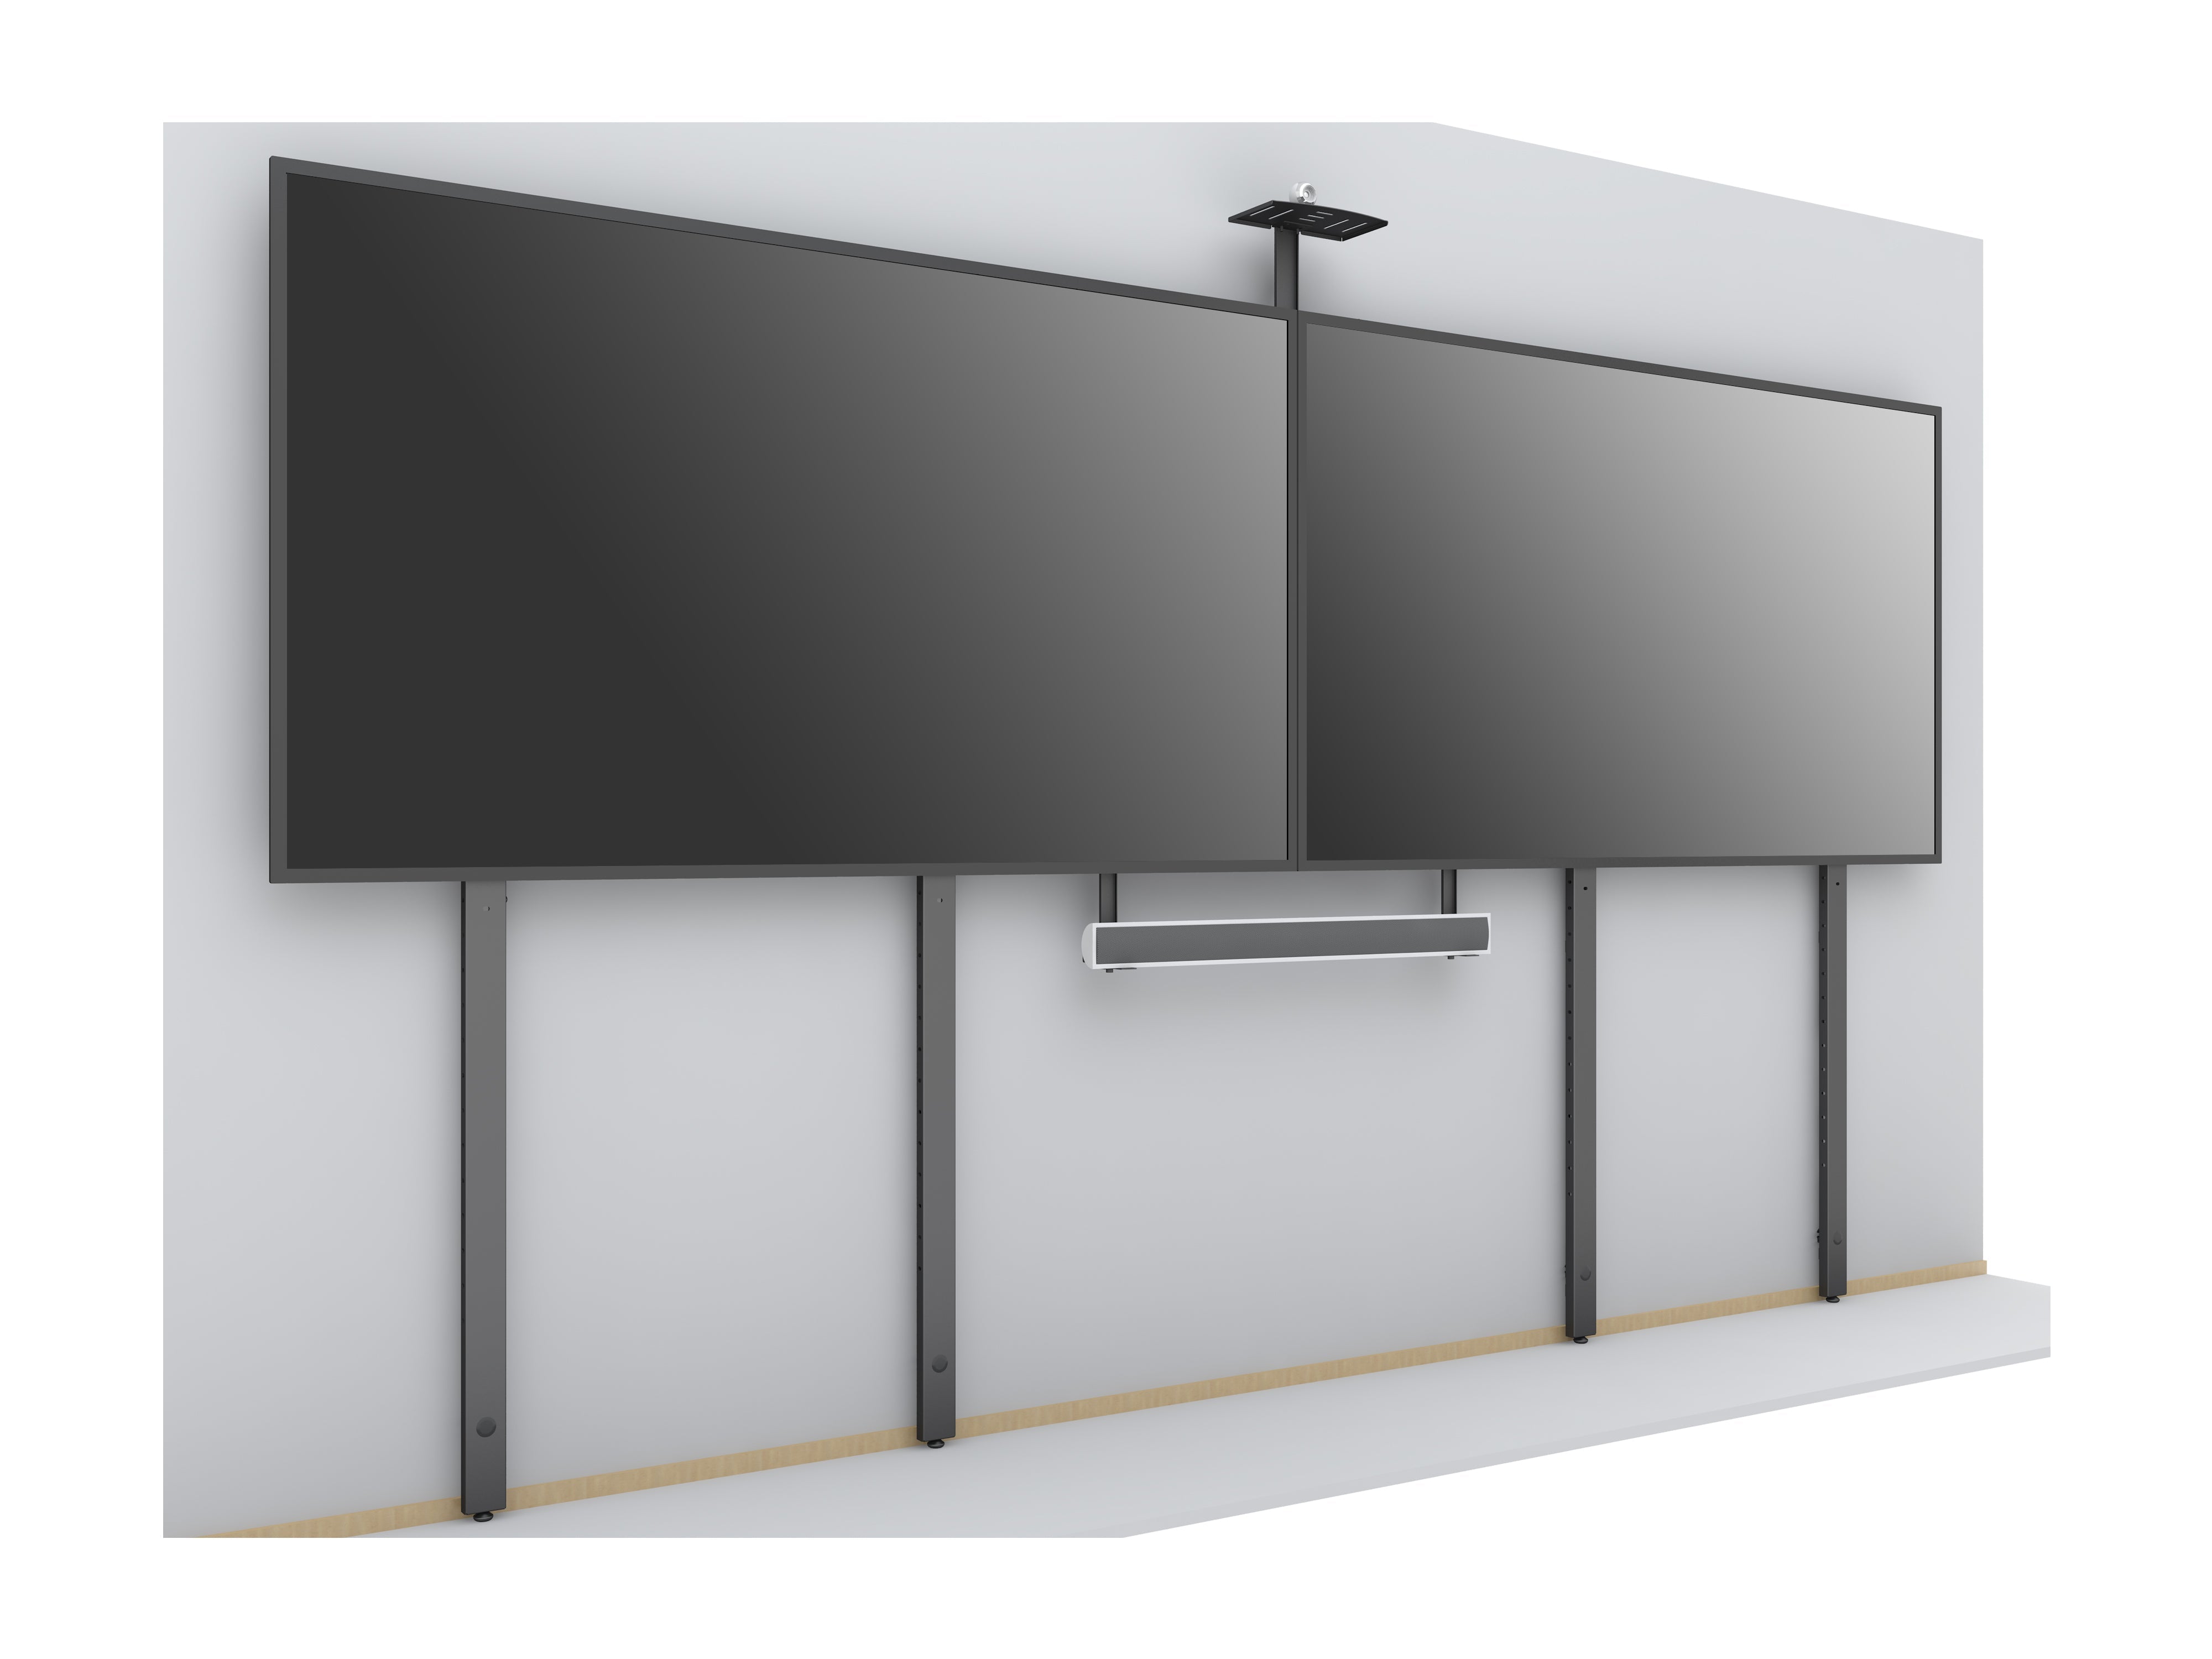 Dual-Screen Video Conference Mount System with Soundbar and Camera Shelf Up to 75" Screens